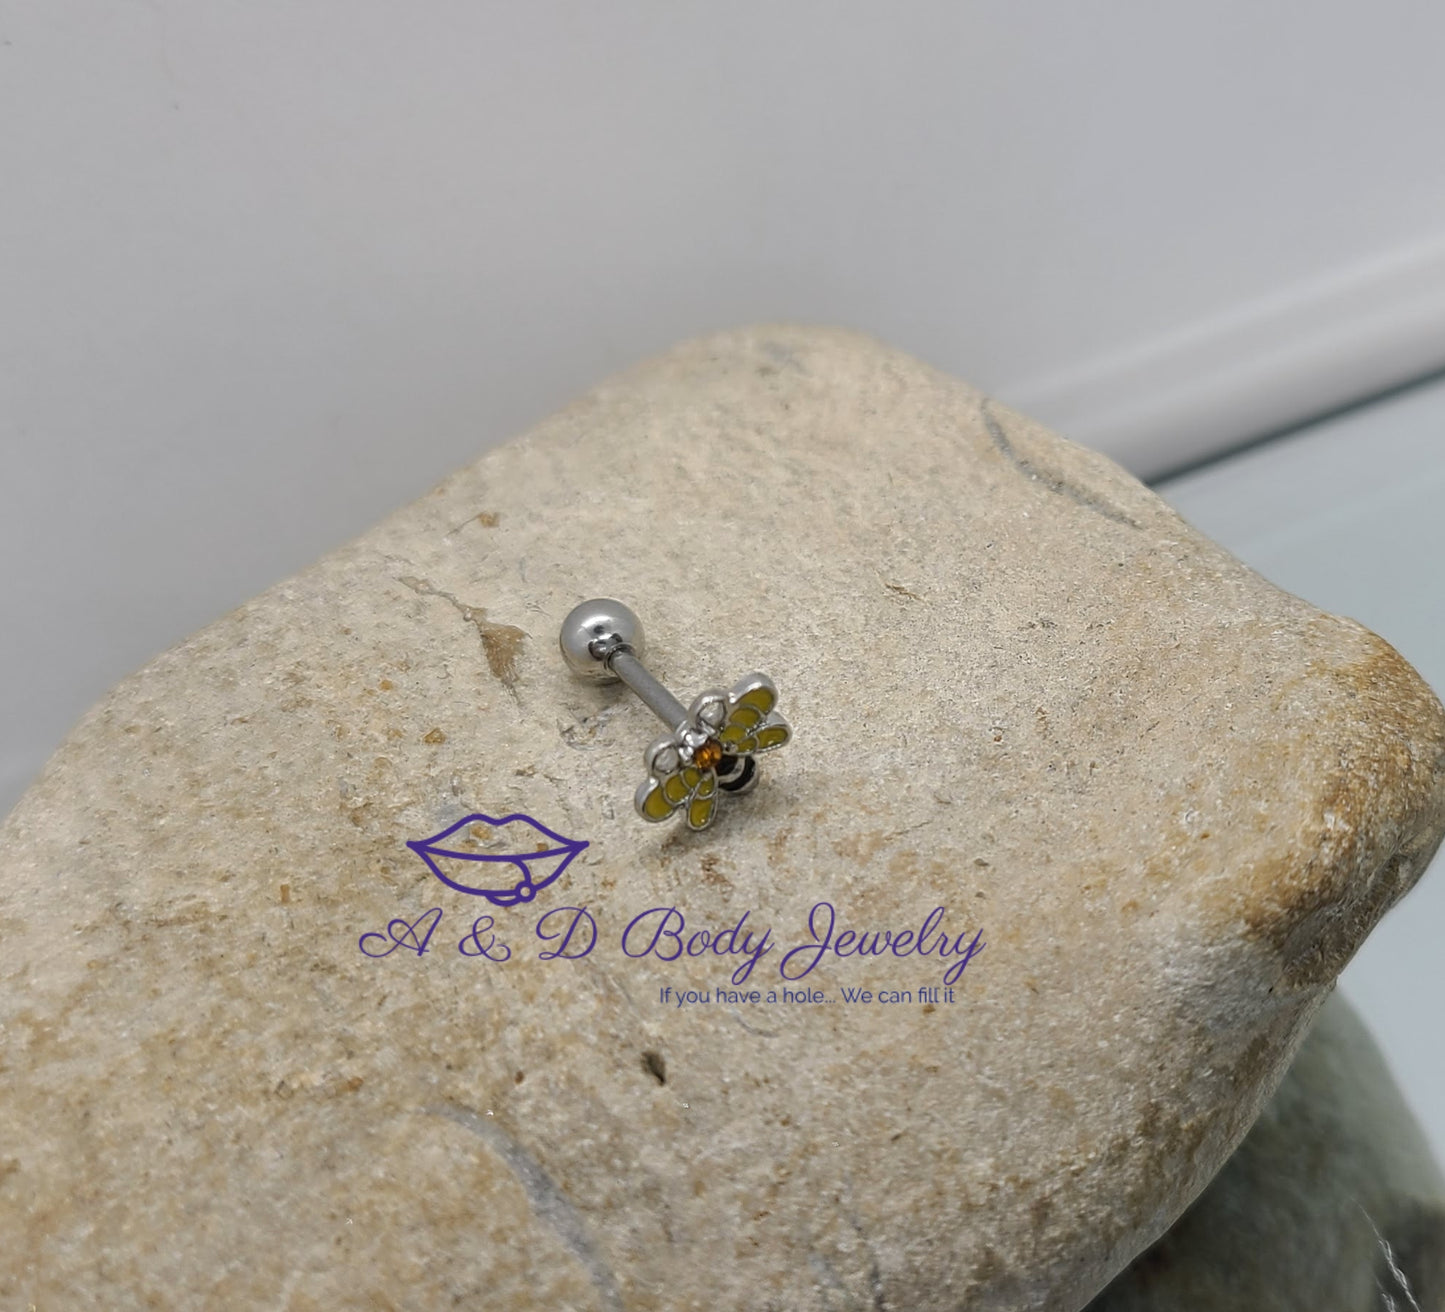 Bumble Bee Cartilage Earring - Cartilage Barbell